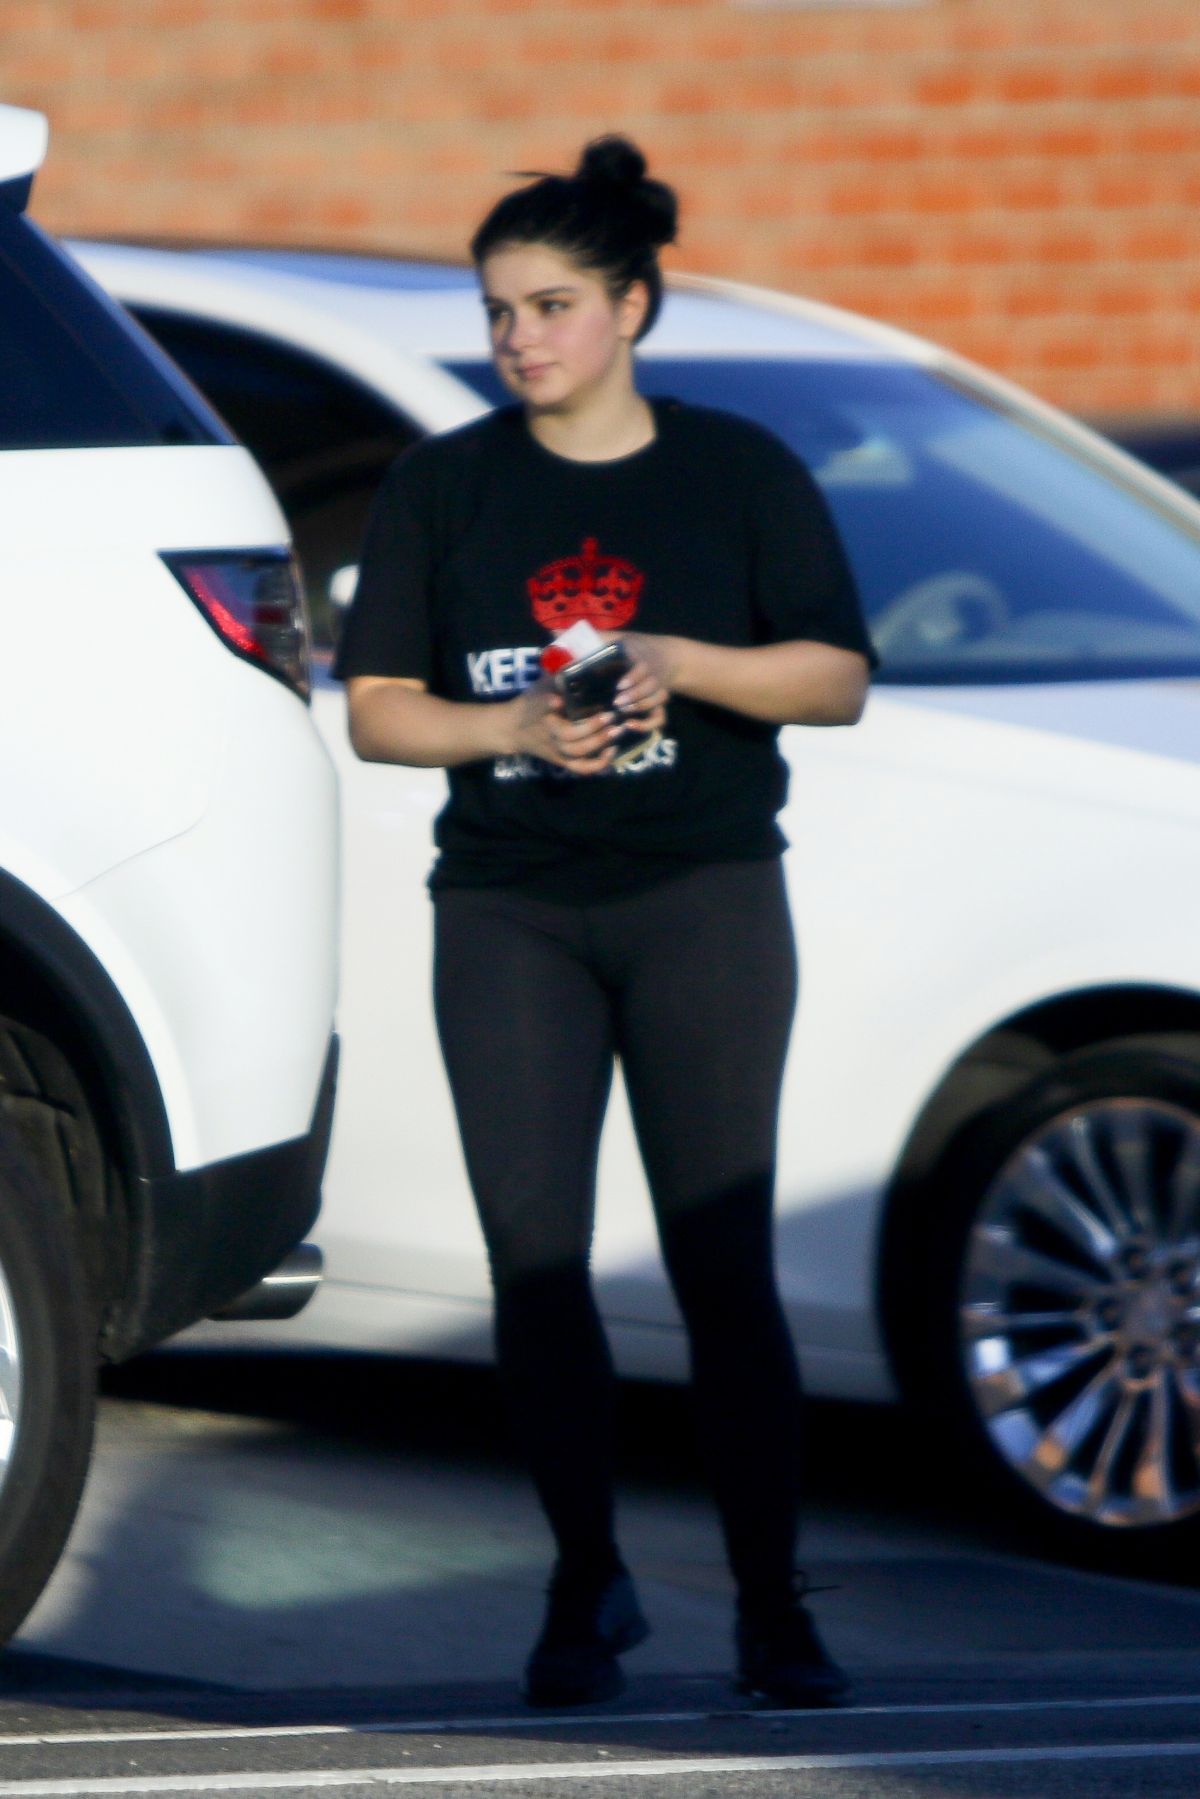 ariel-winter-out-and-about-in-los-angeles-07-02-2018-1.jpg